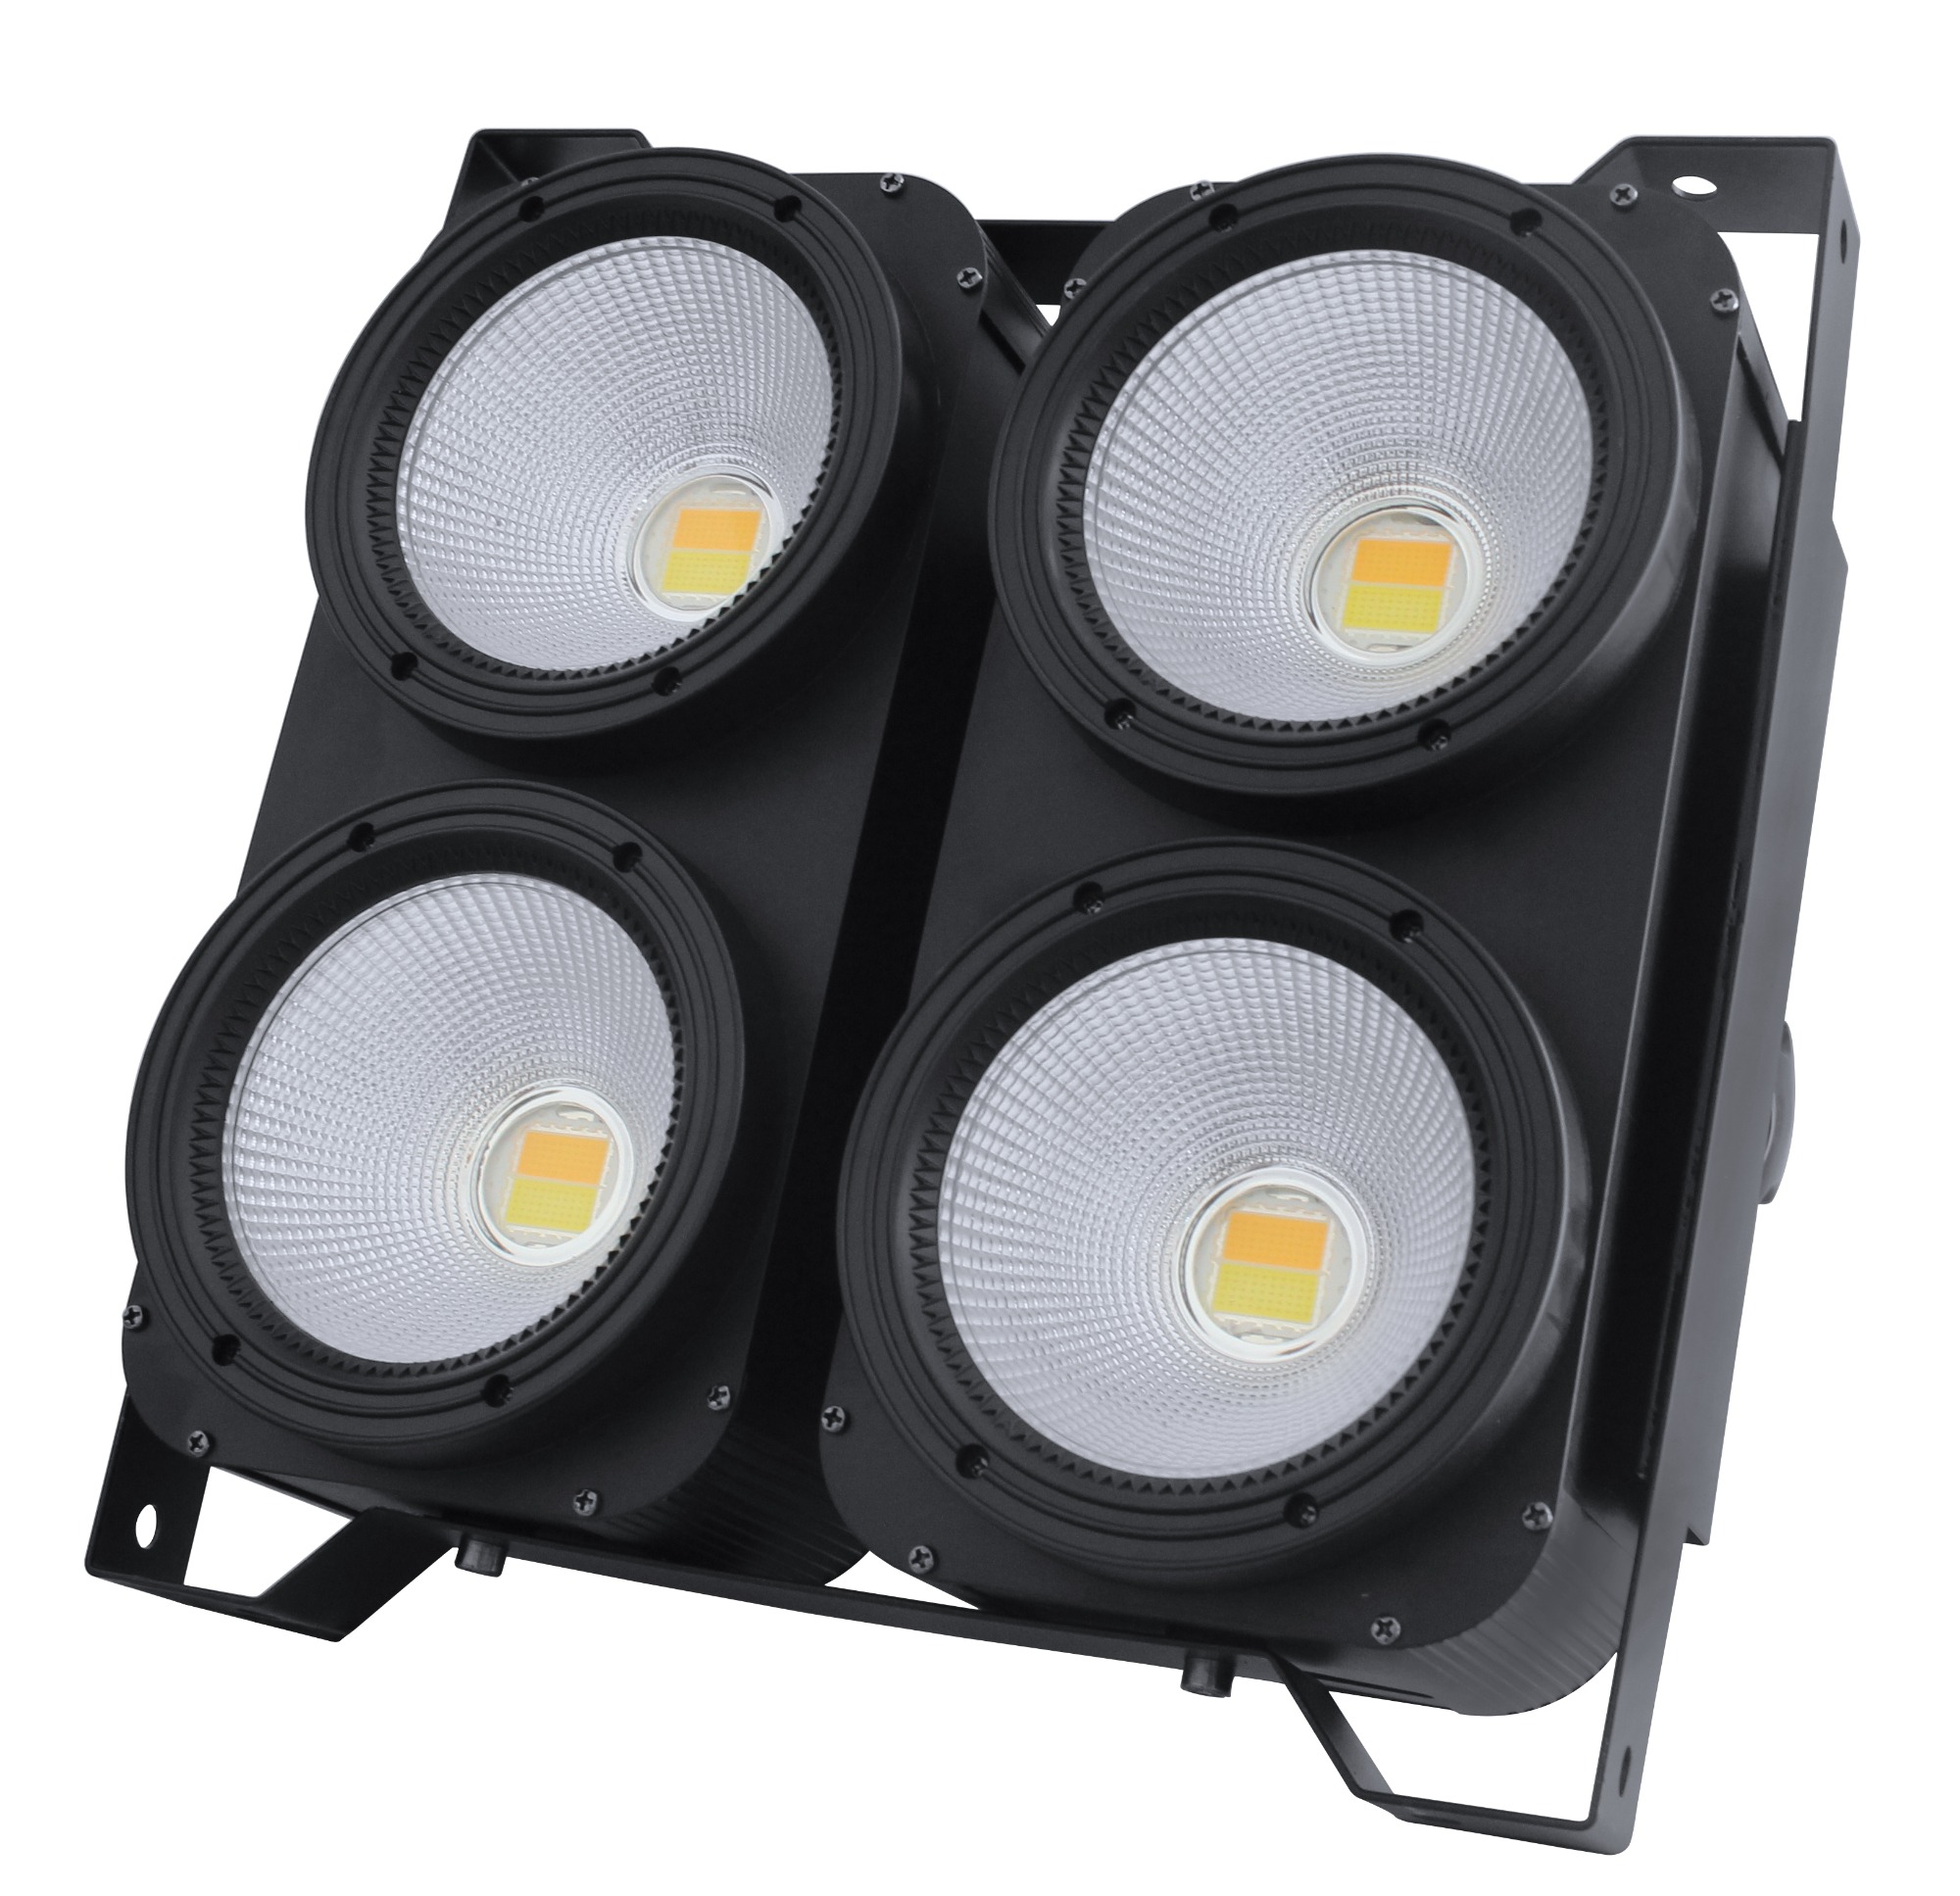 4*100W CoB LED blinder light with Continuous Light Source for Photography and Videography